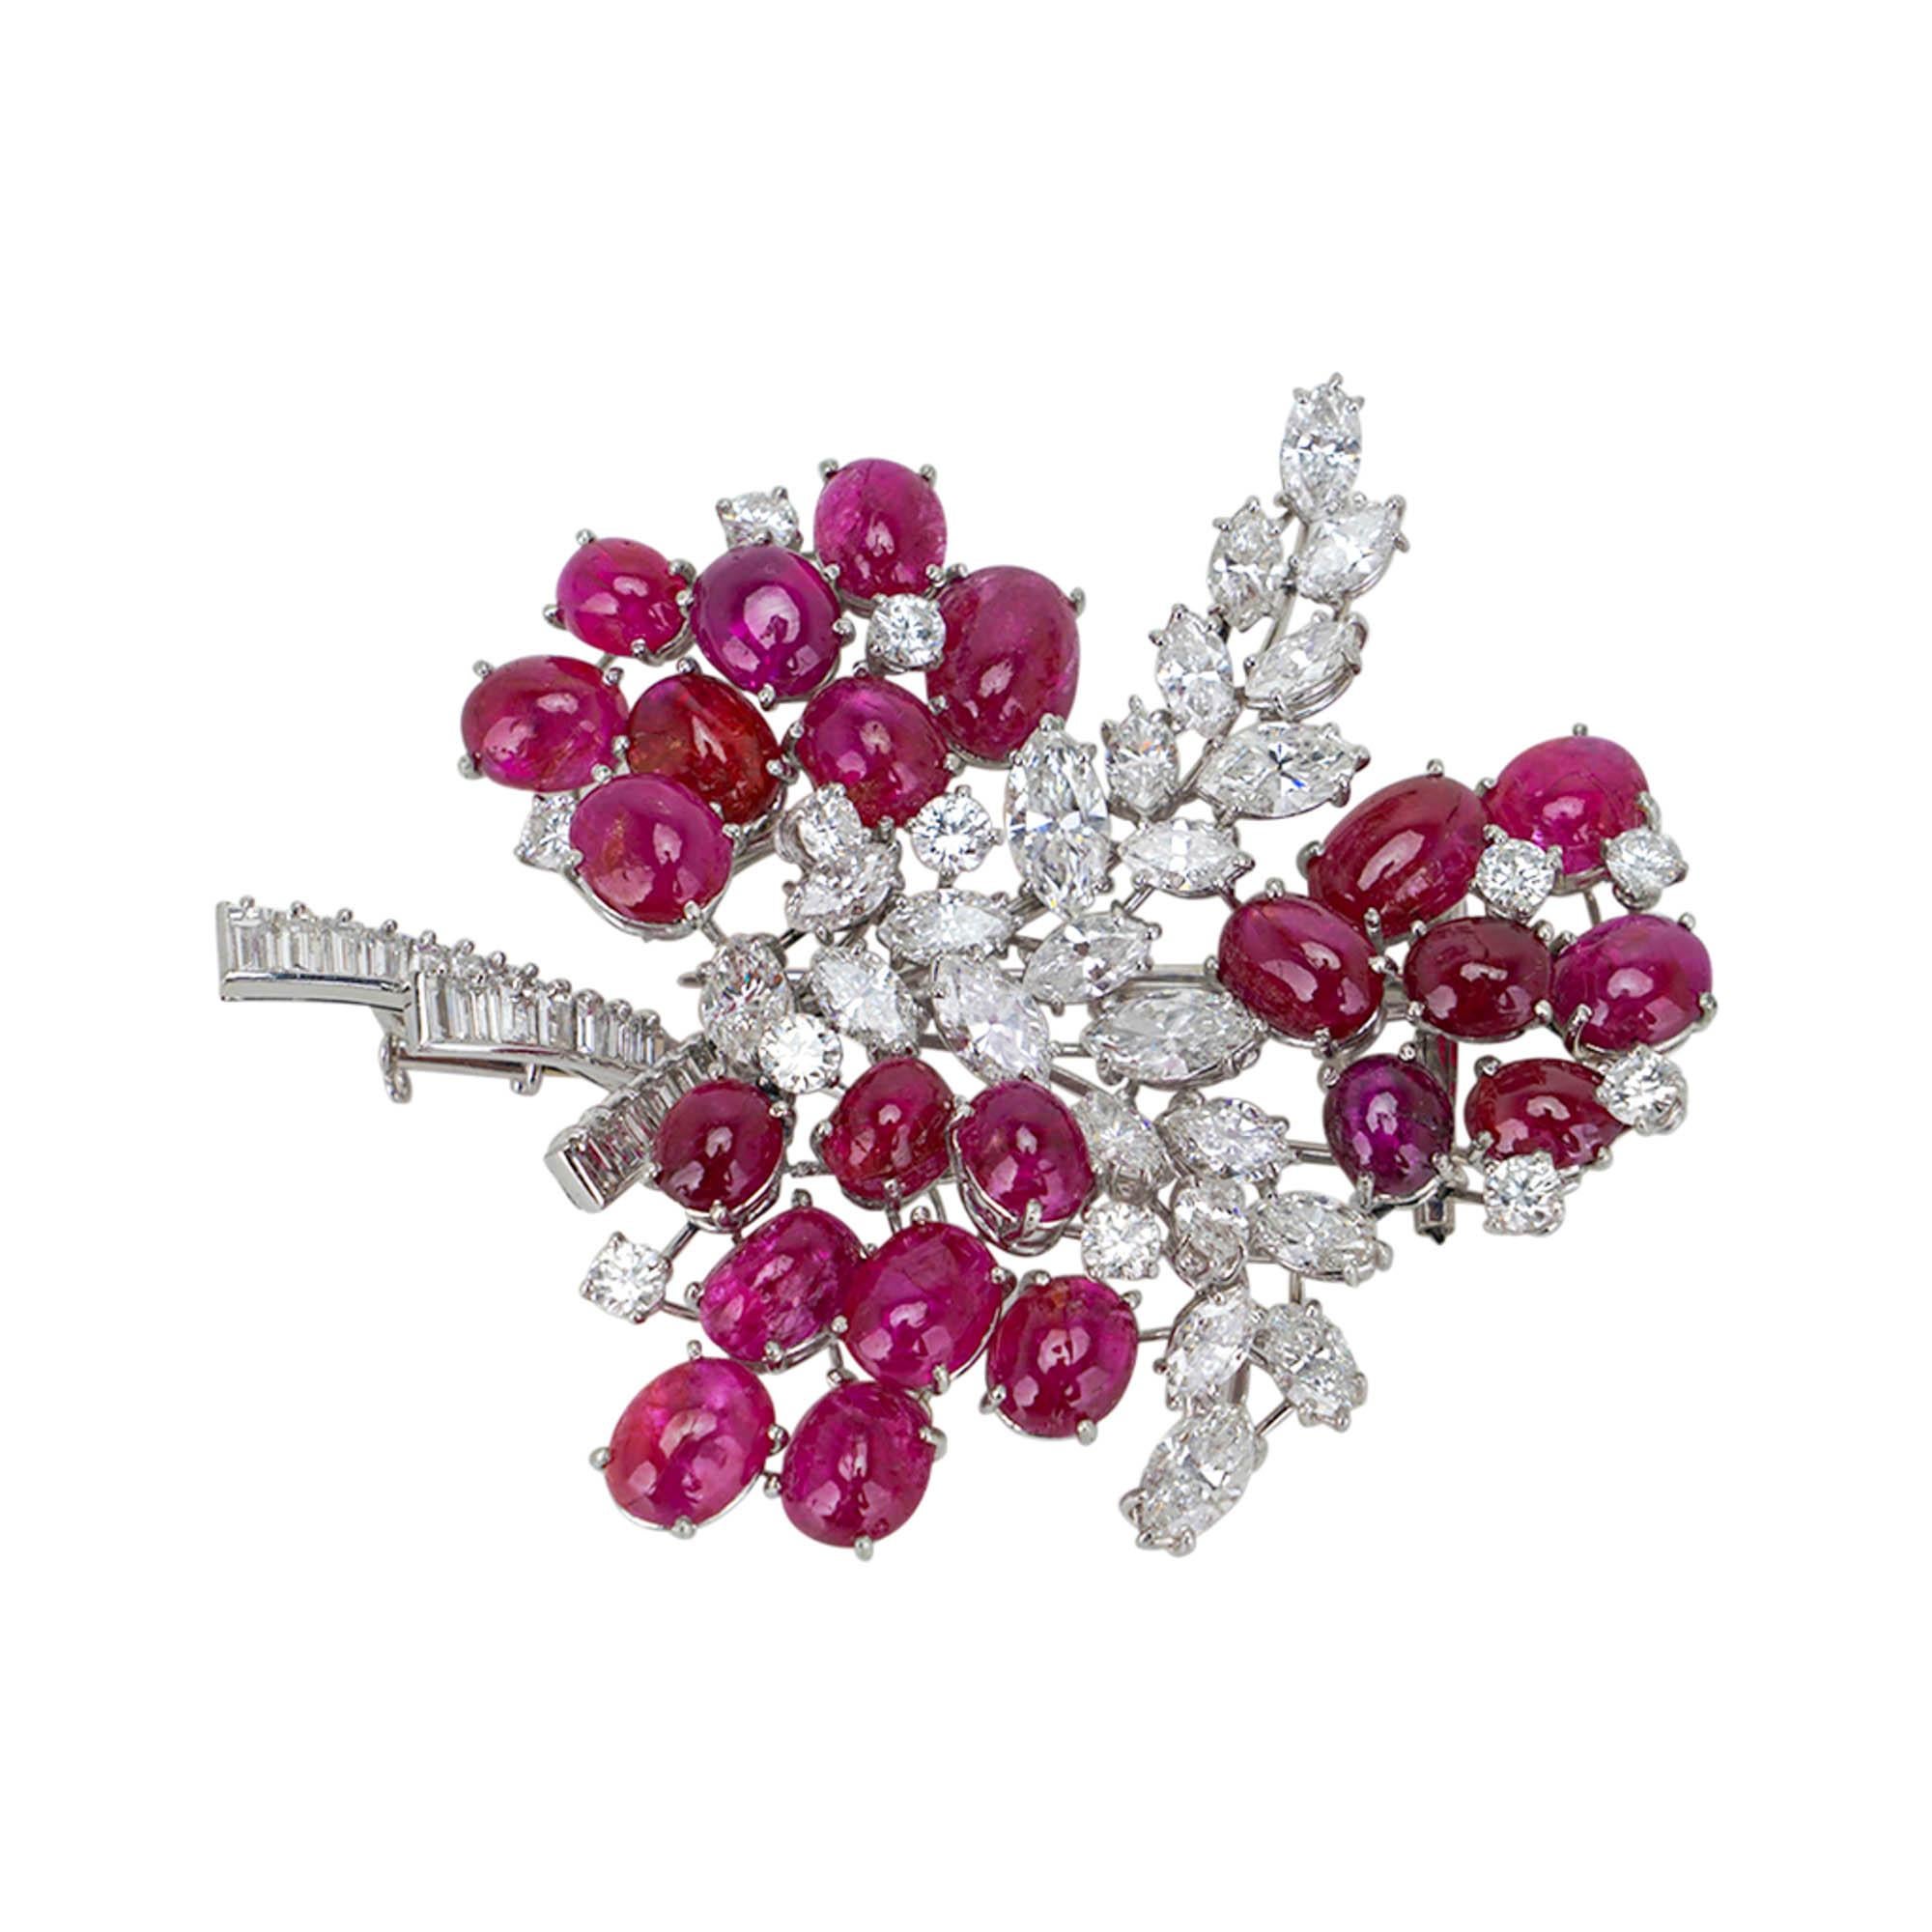 Diamond and Ruby Platinum Setting Vintage Brooch Floral Design For Sale 2